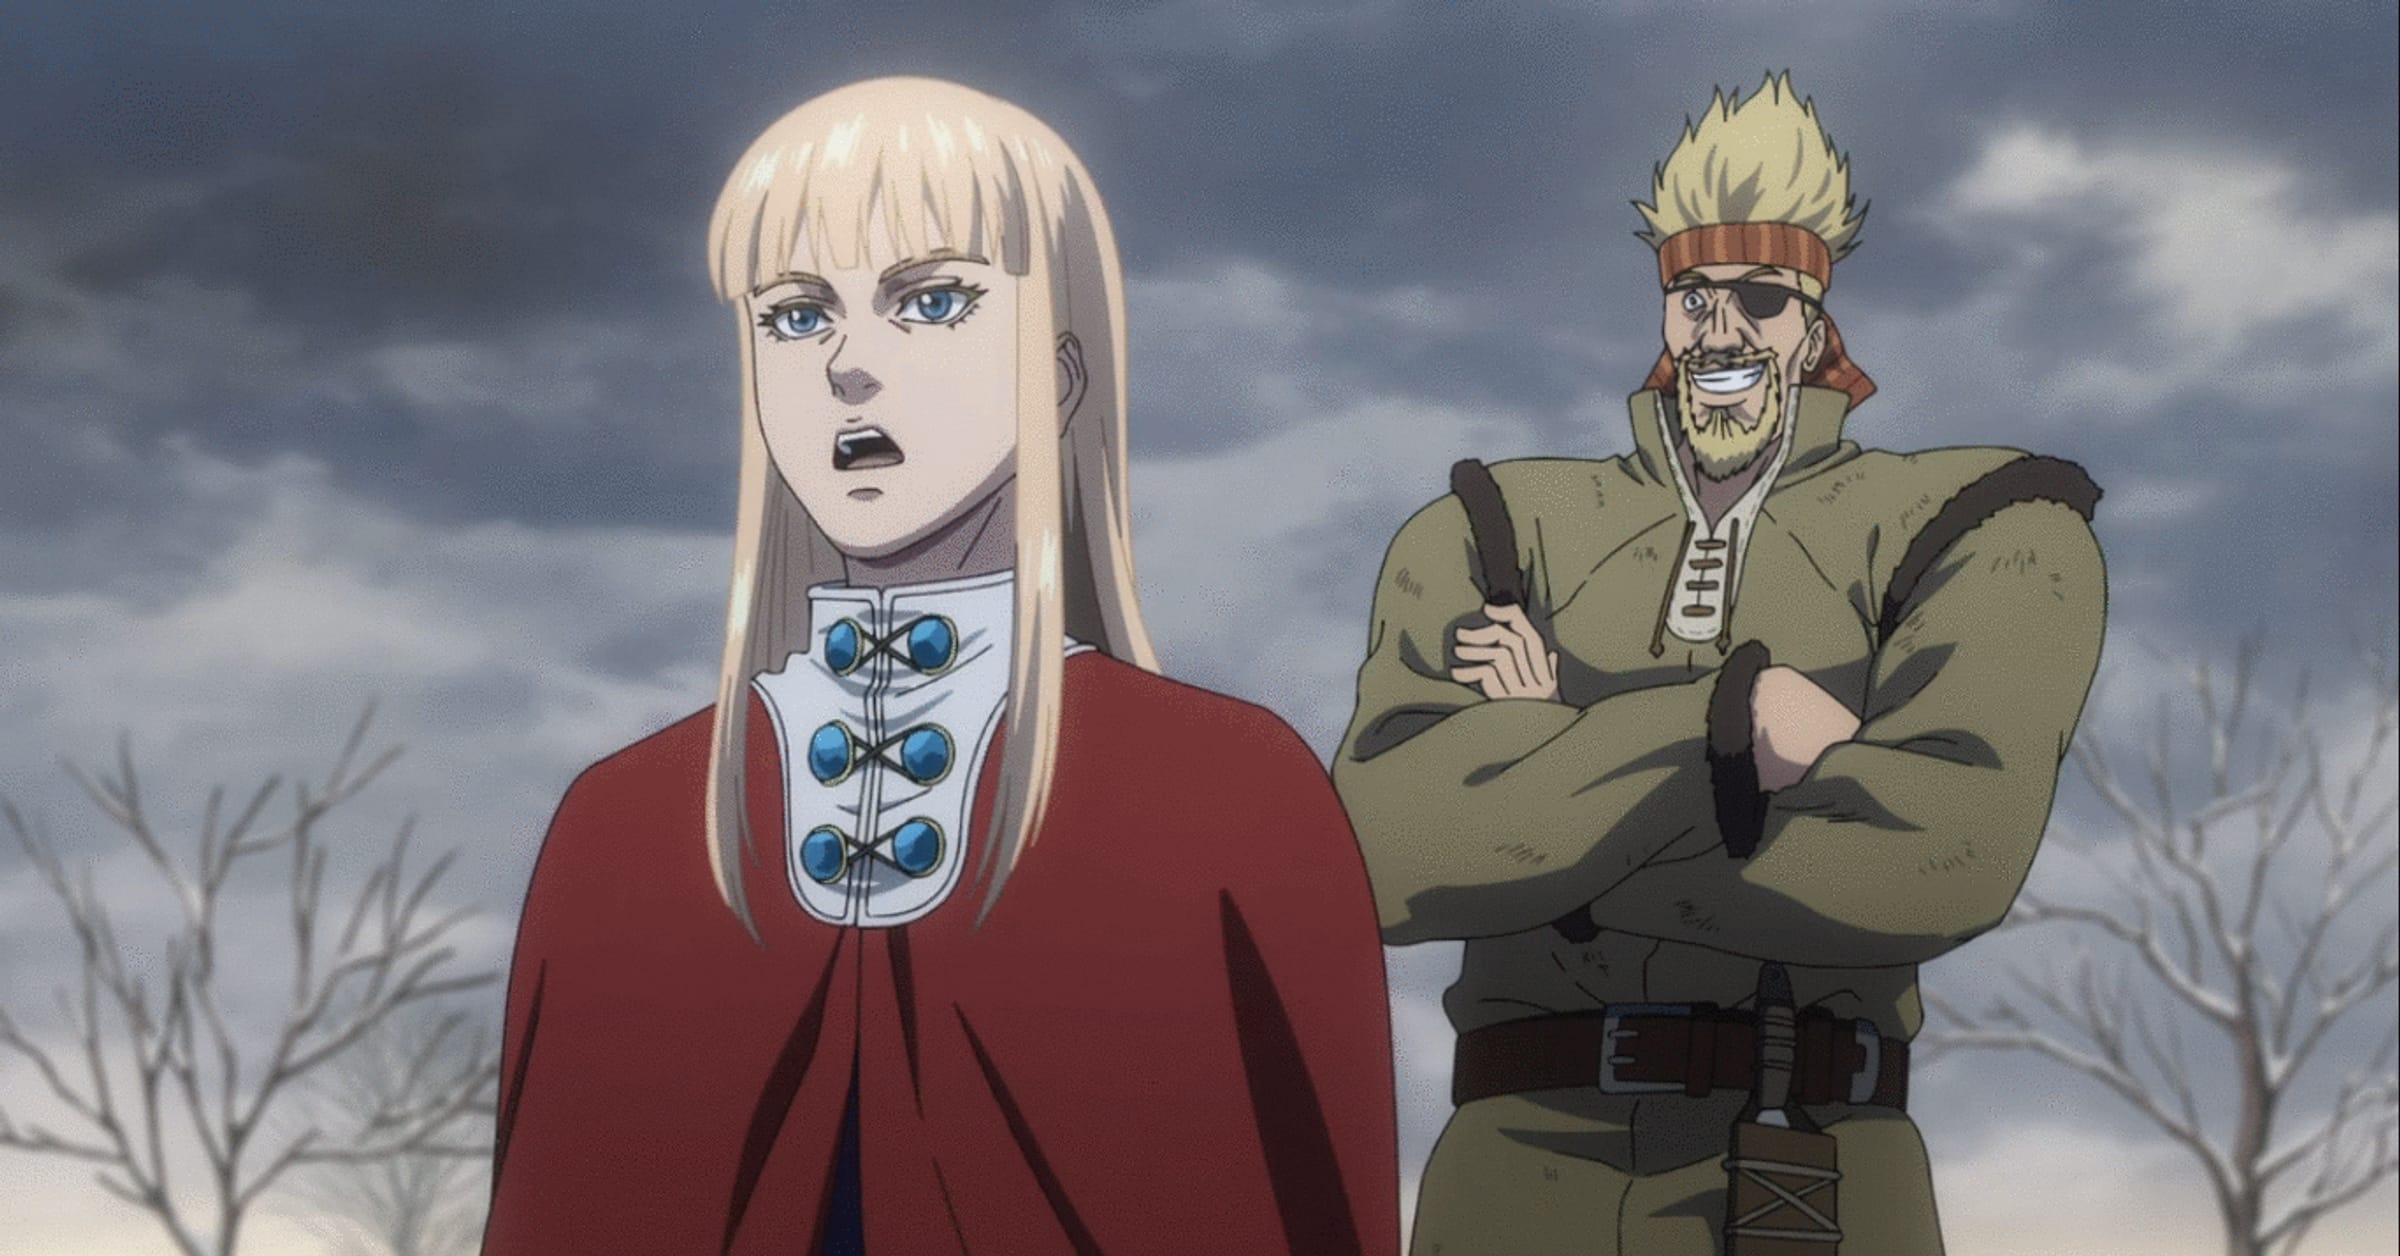 15 Best Kings & Emperors in Anime: Our Top Characters List